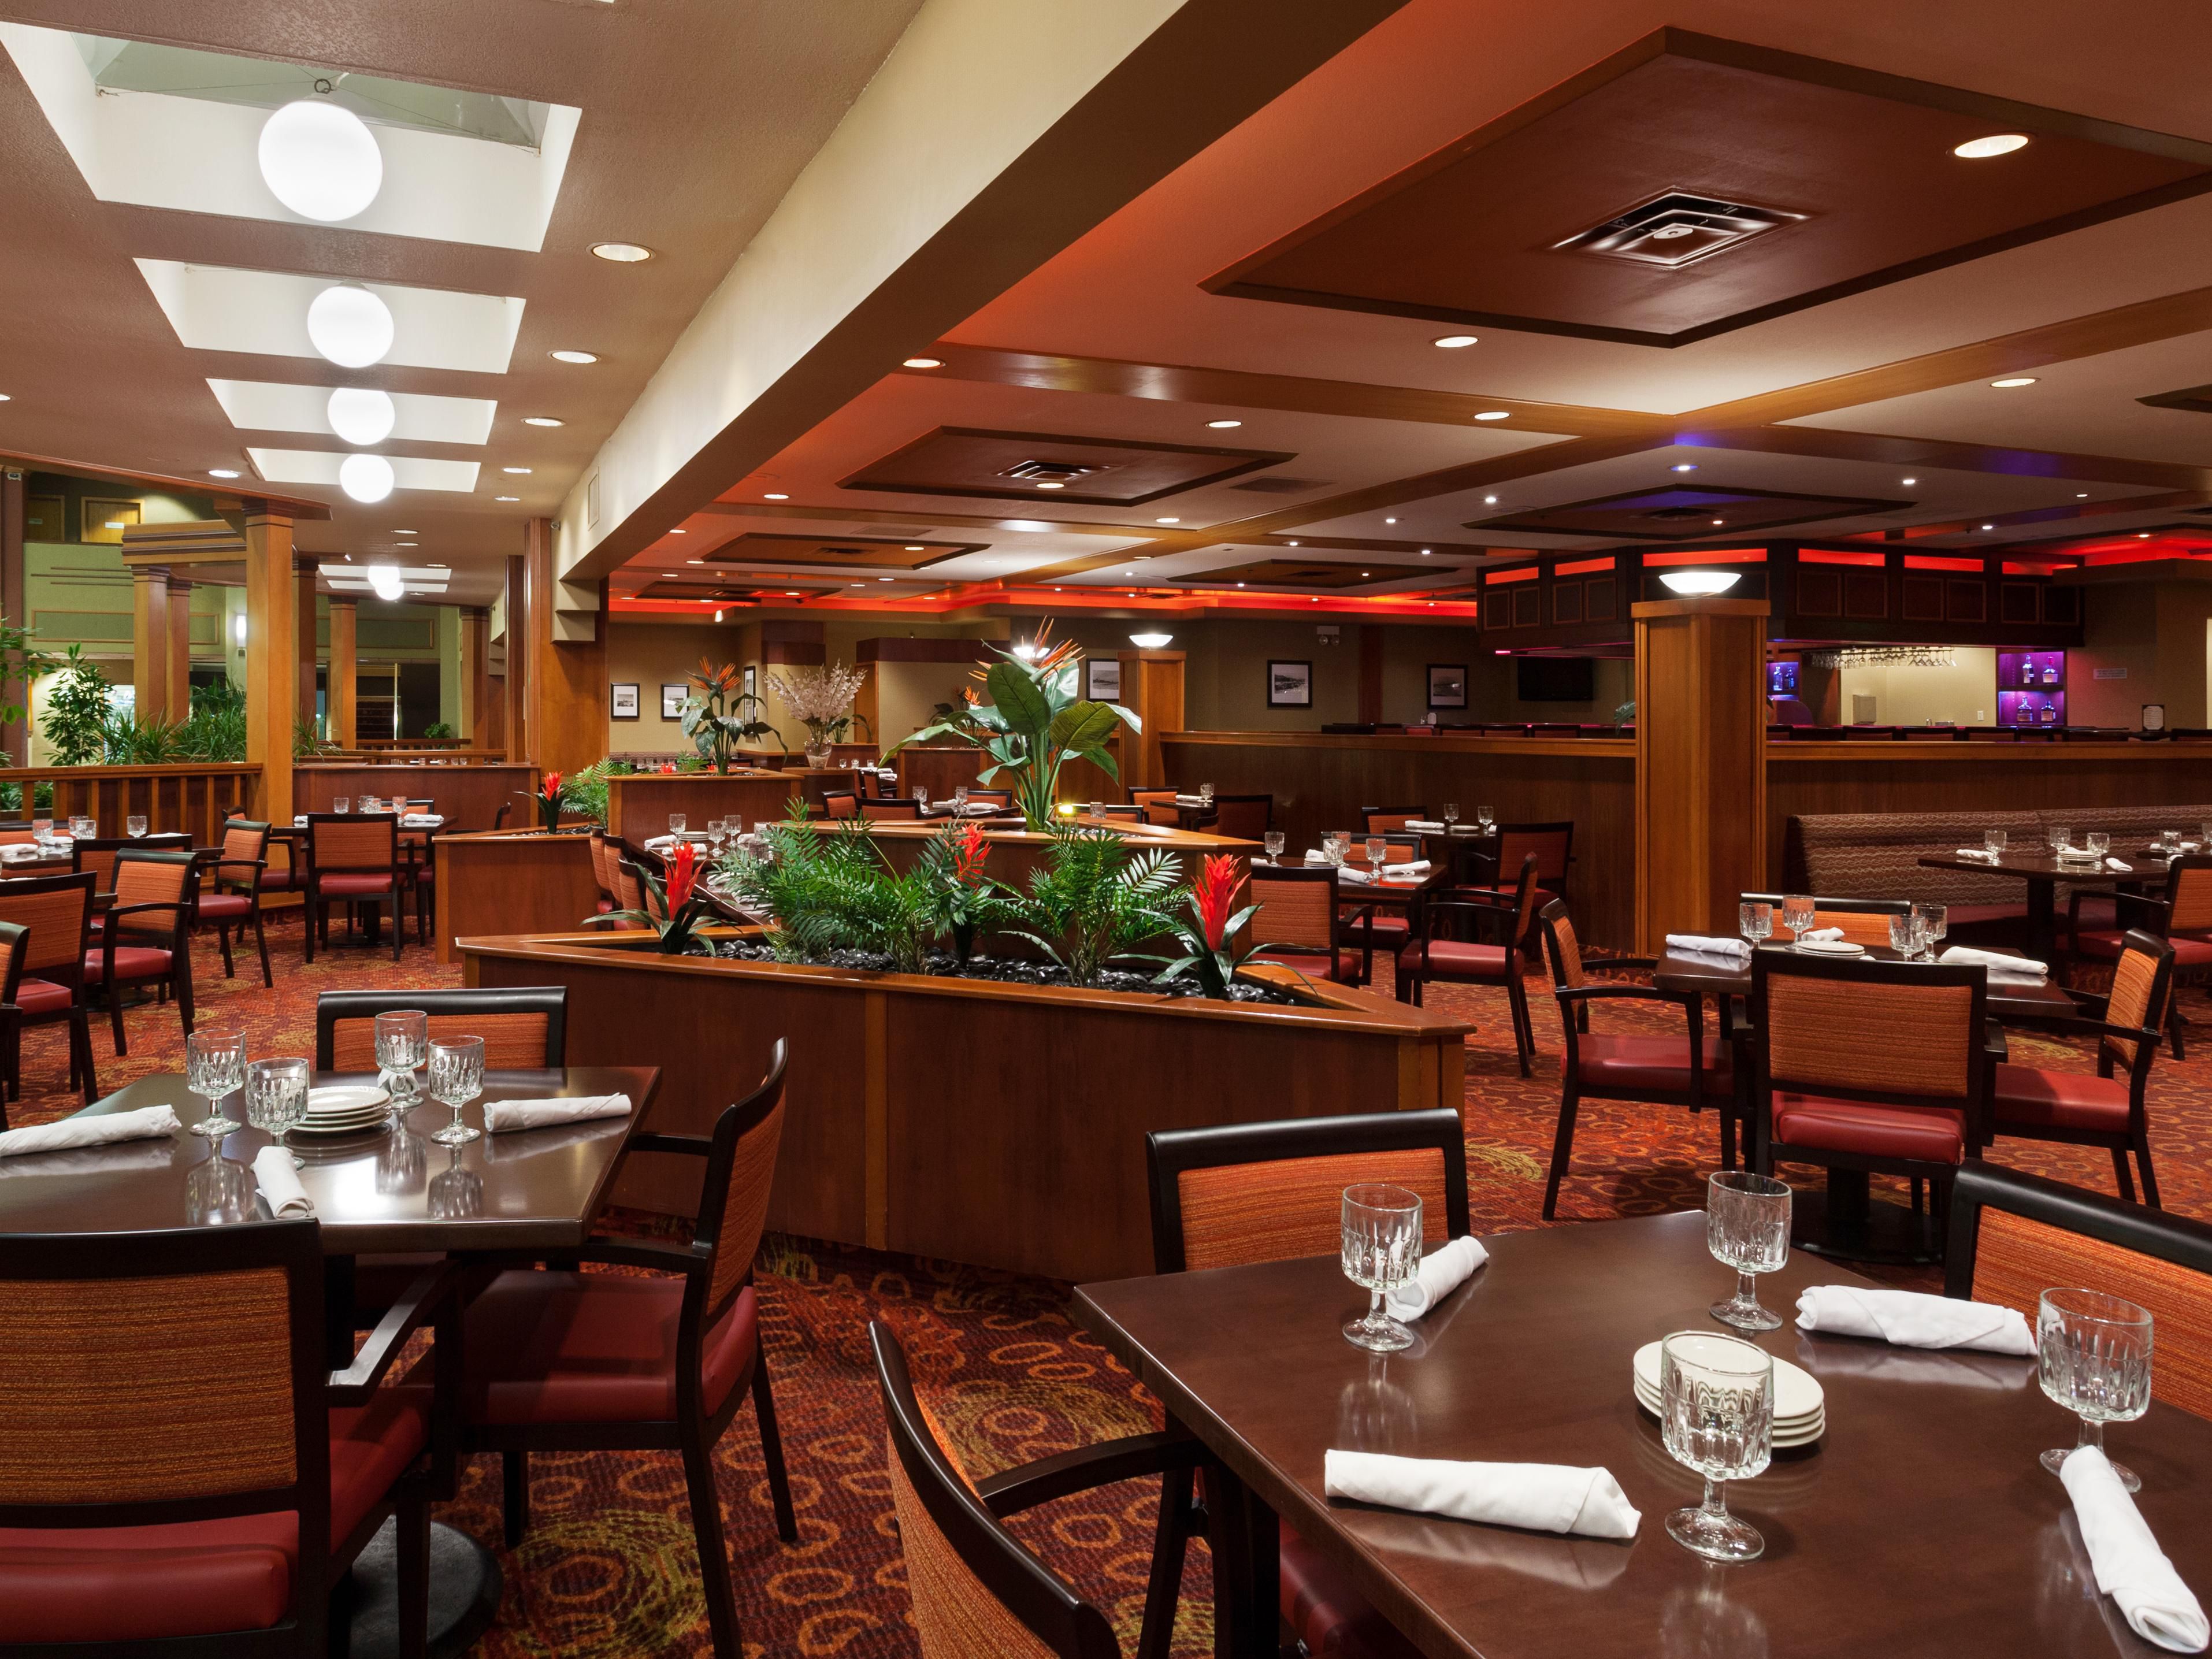 Our Holiday Inn Cincinnati Airport hotel's restaurant, McKenna's Restaurant & Bar, features succulent food options. You'll be sure to enjoy the delicious American cuisine, which is served for breakfast and dinner.